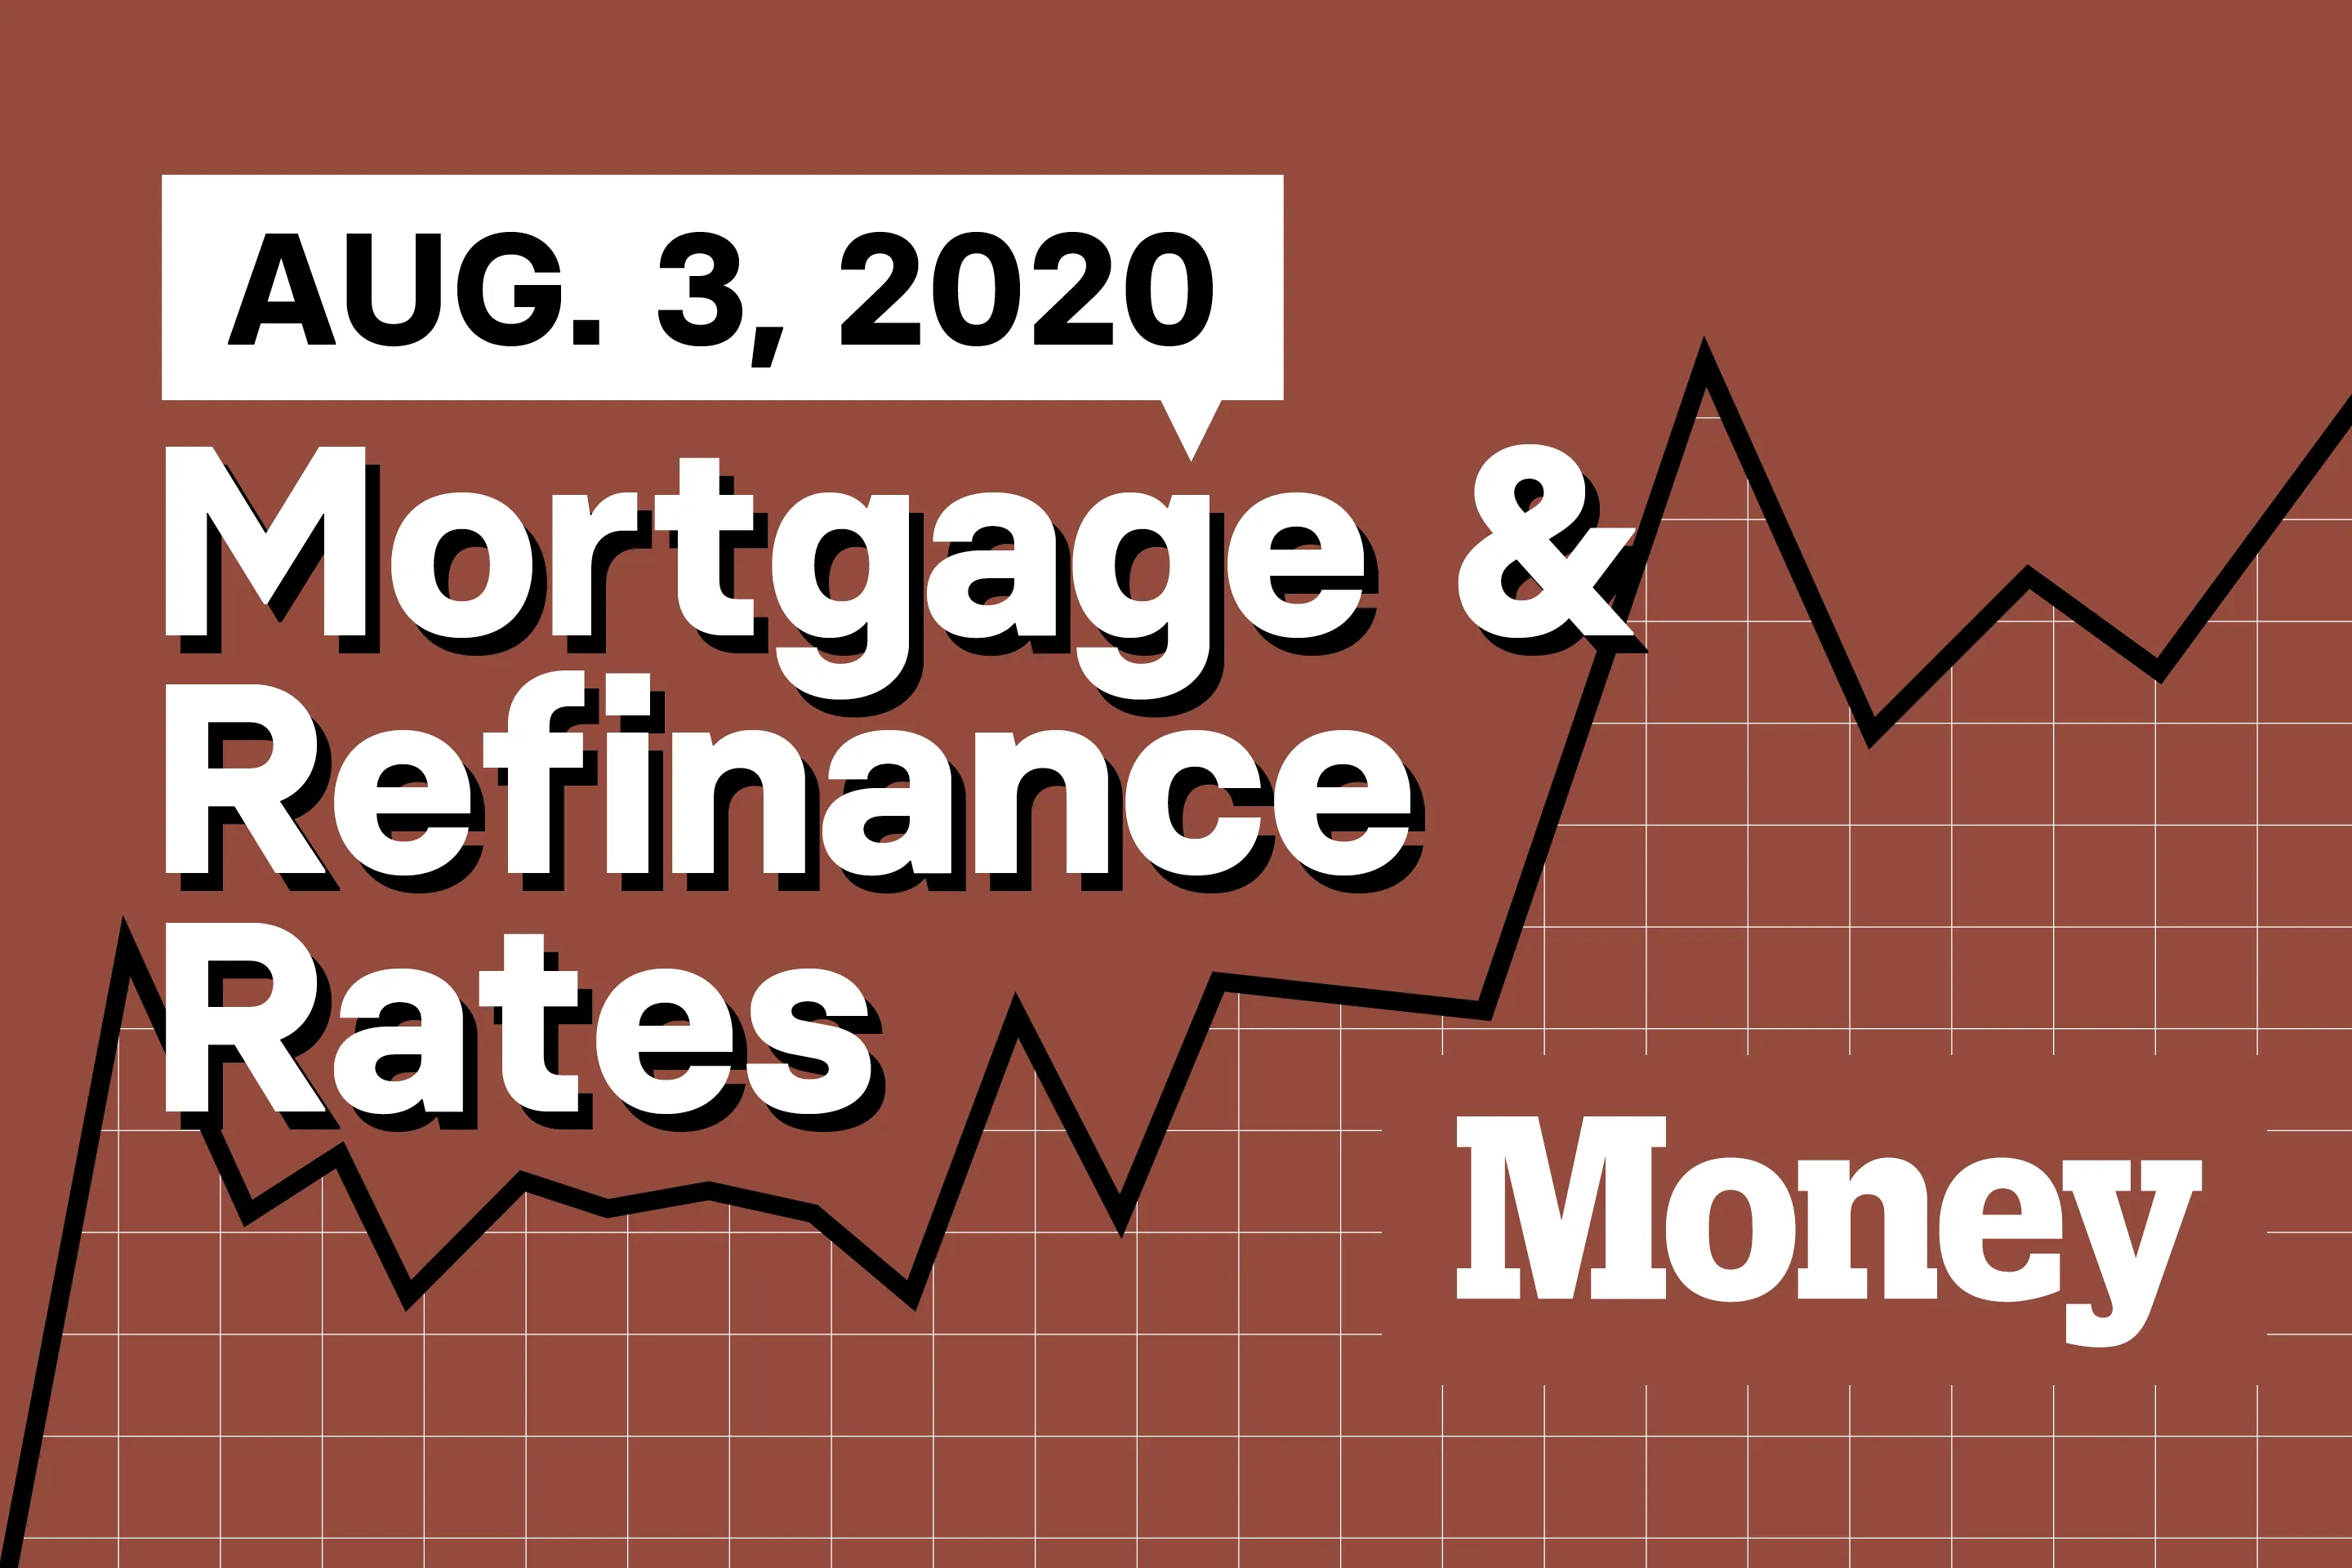 Here Are Today's Best Mortgage & Refinance Rates for August 3, 2020